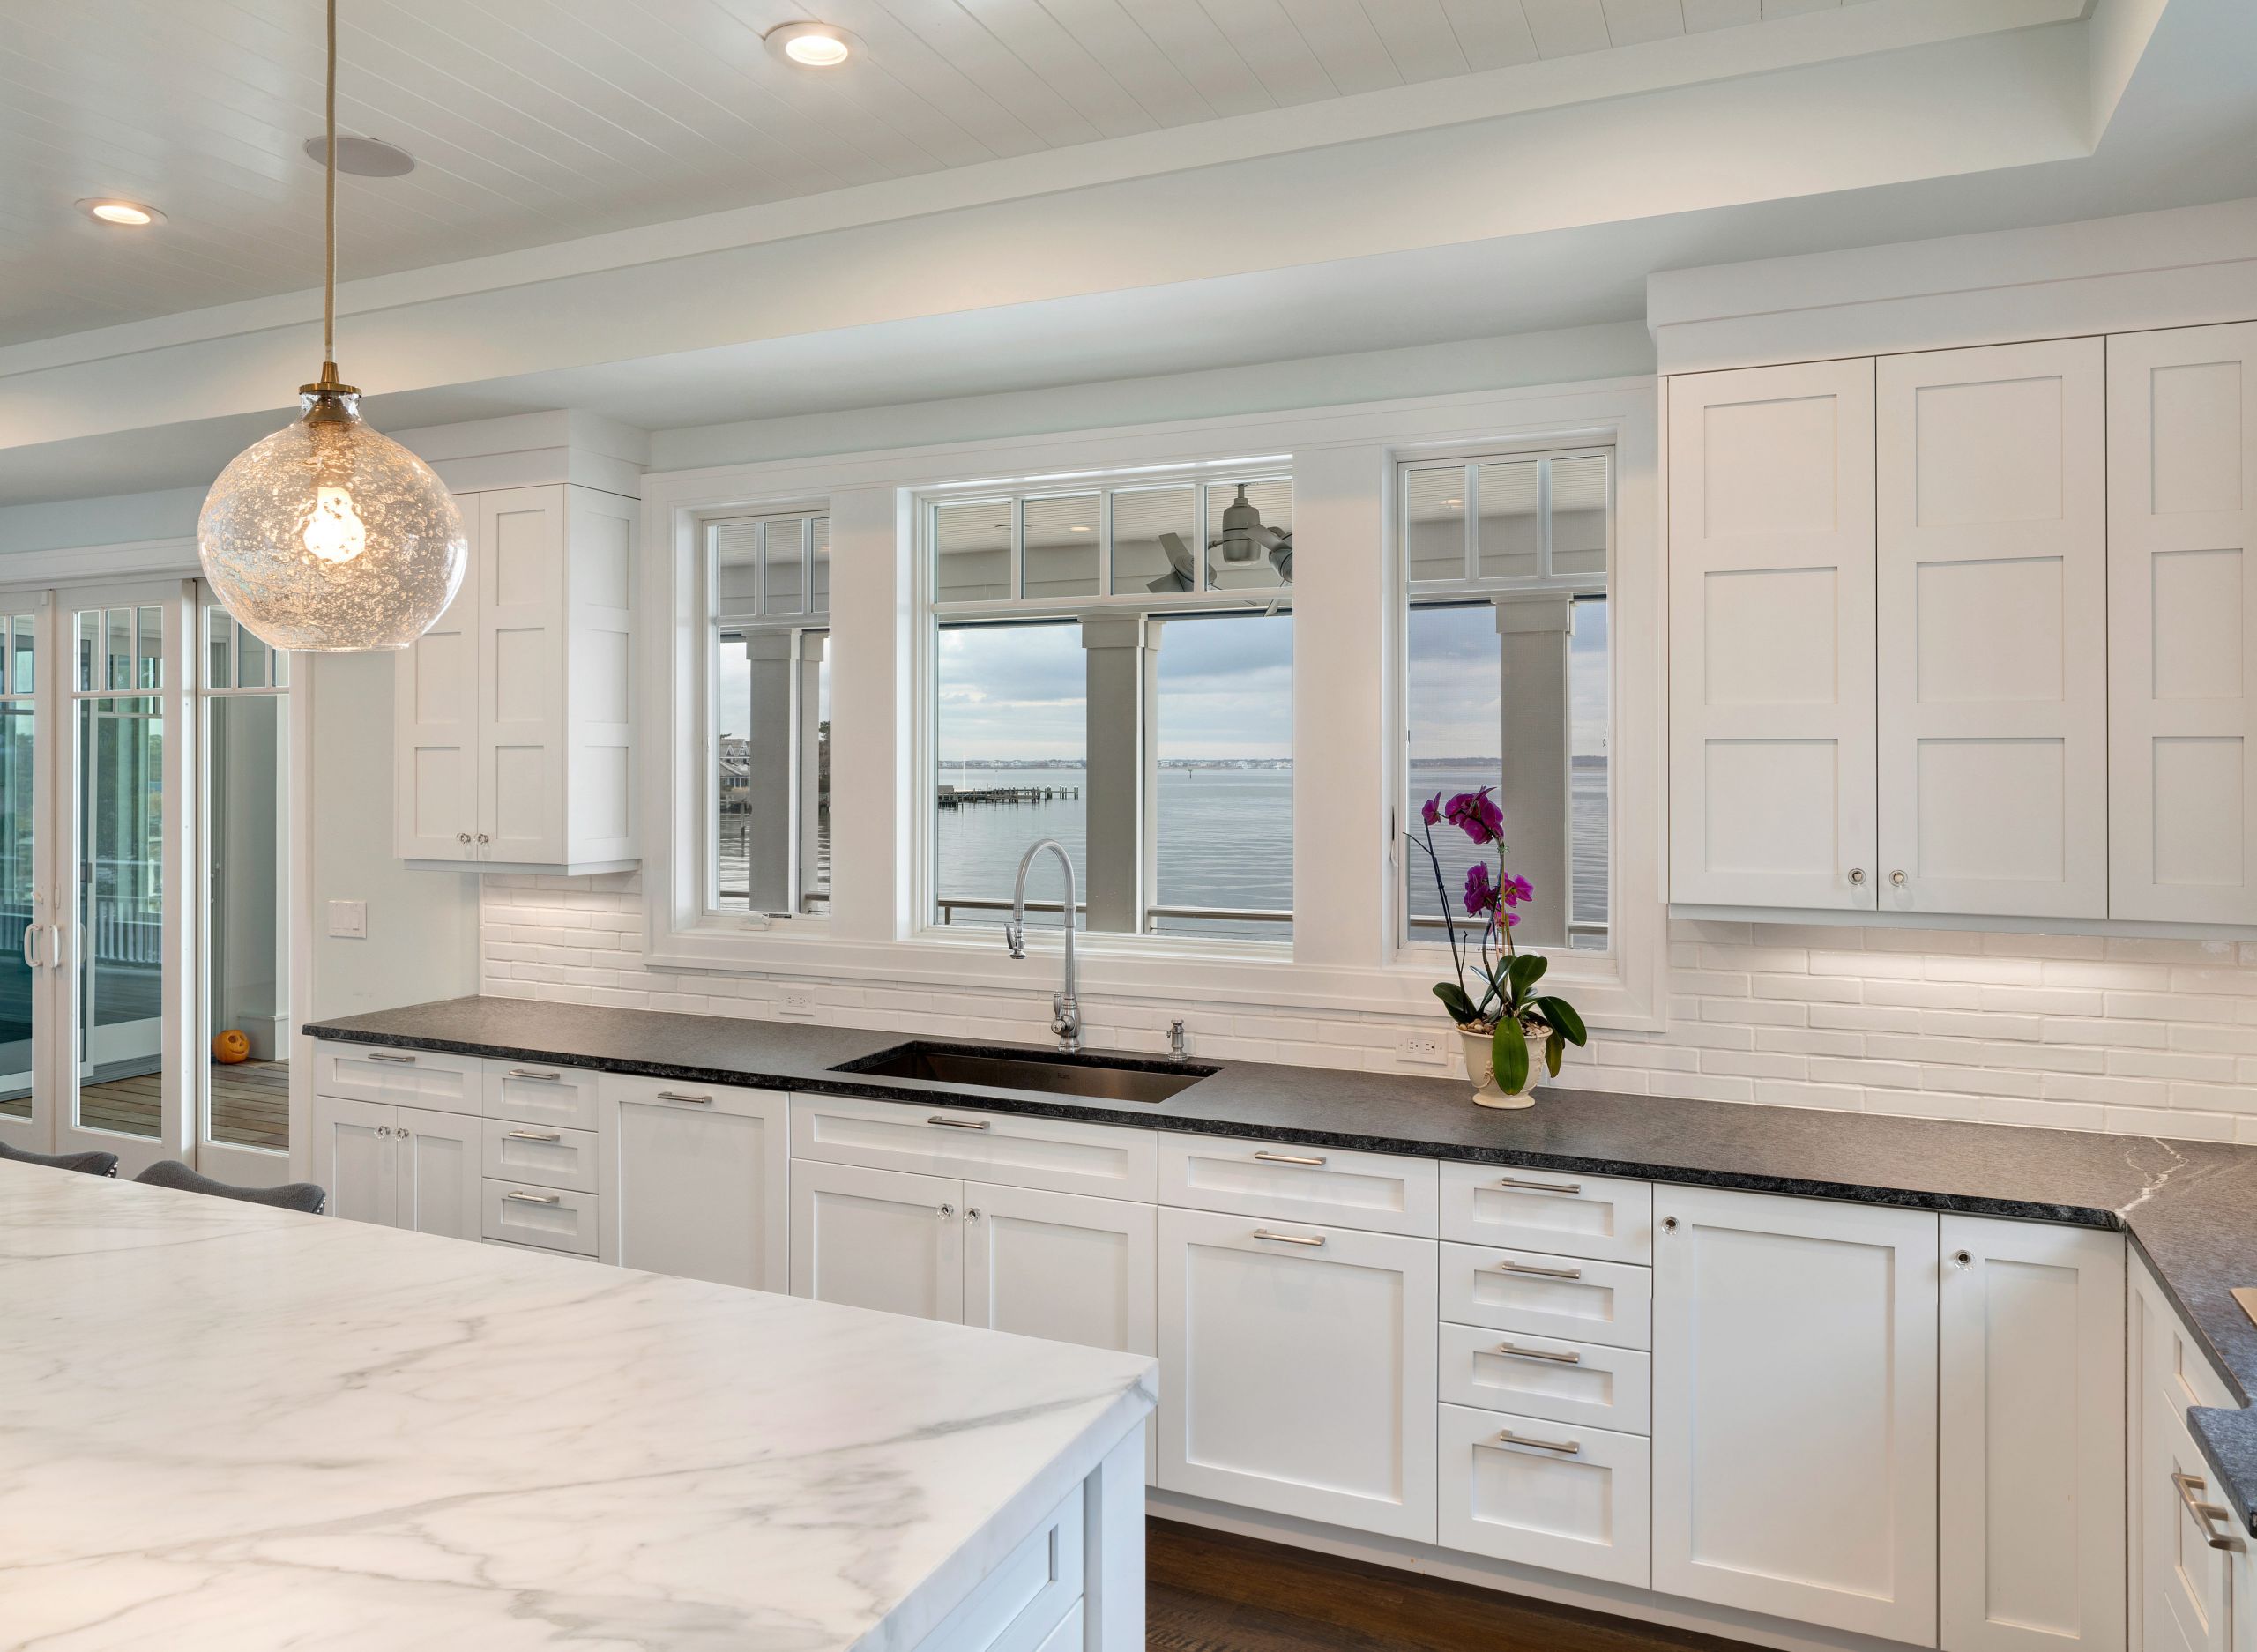 White Kitchen Cabinet Images
 White Transitional Kitchen Mantoloking New Jersey by